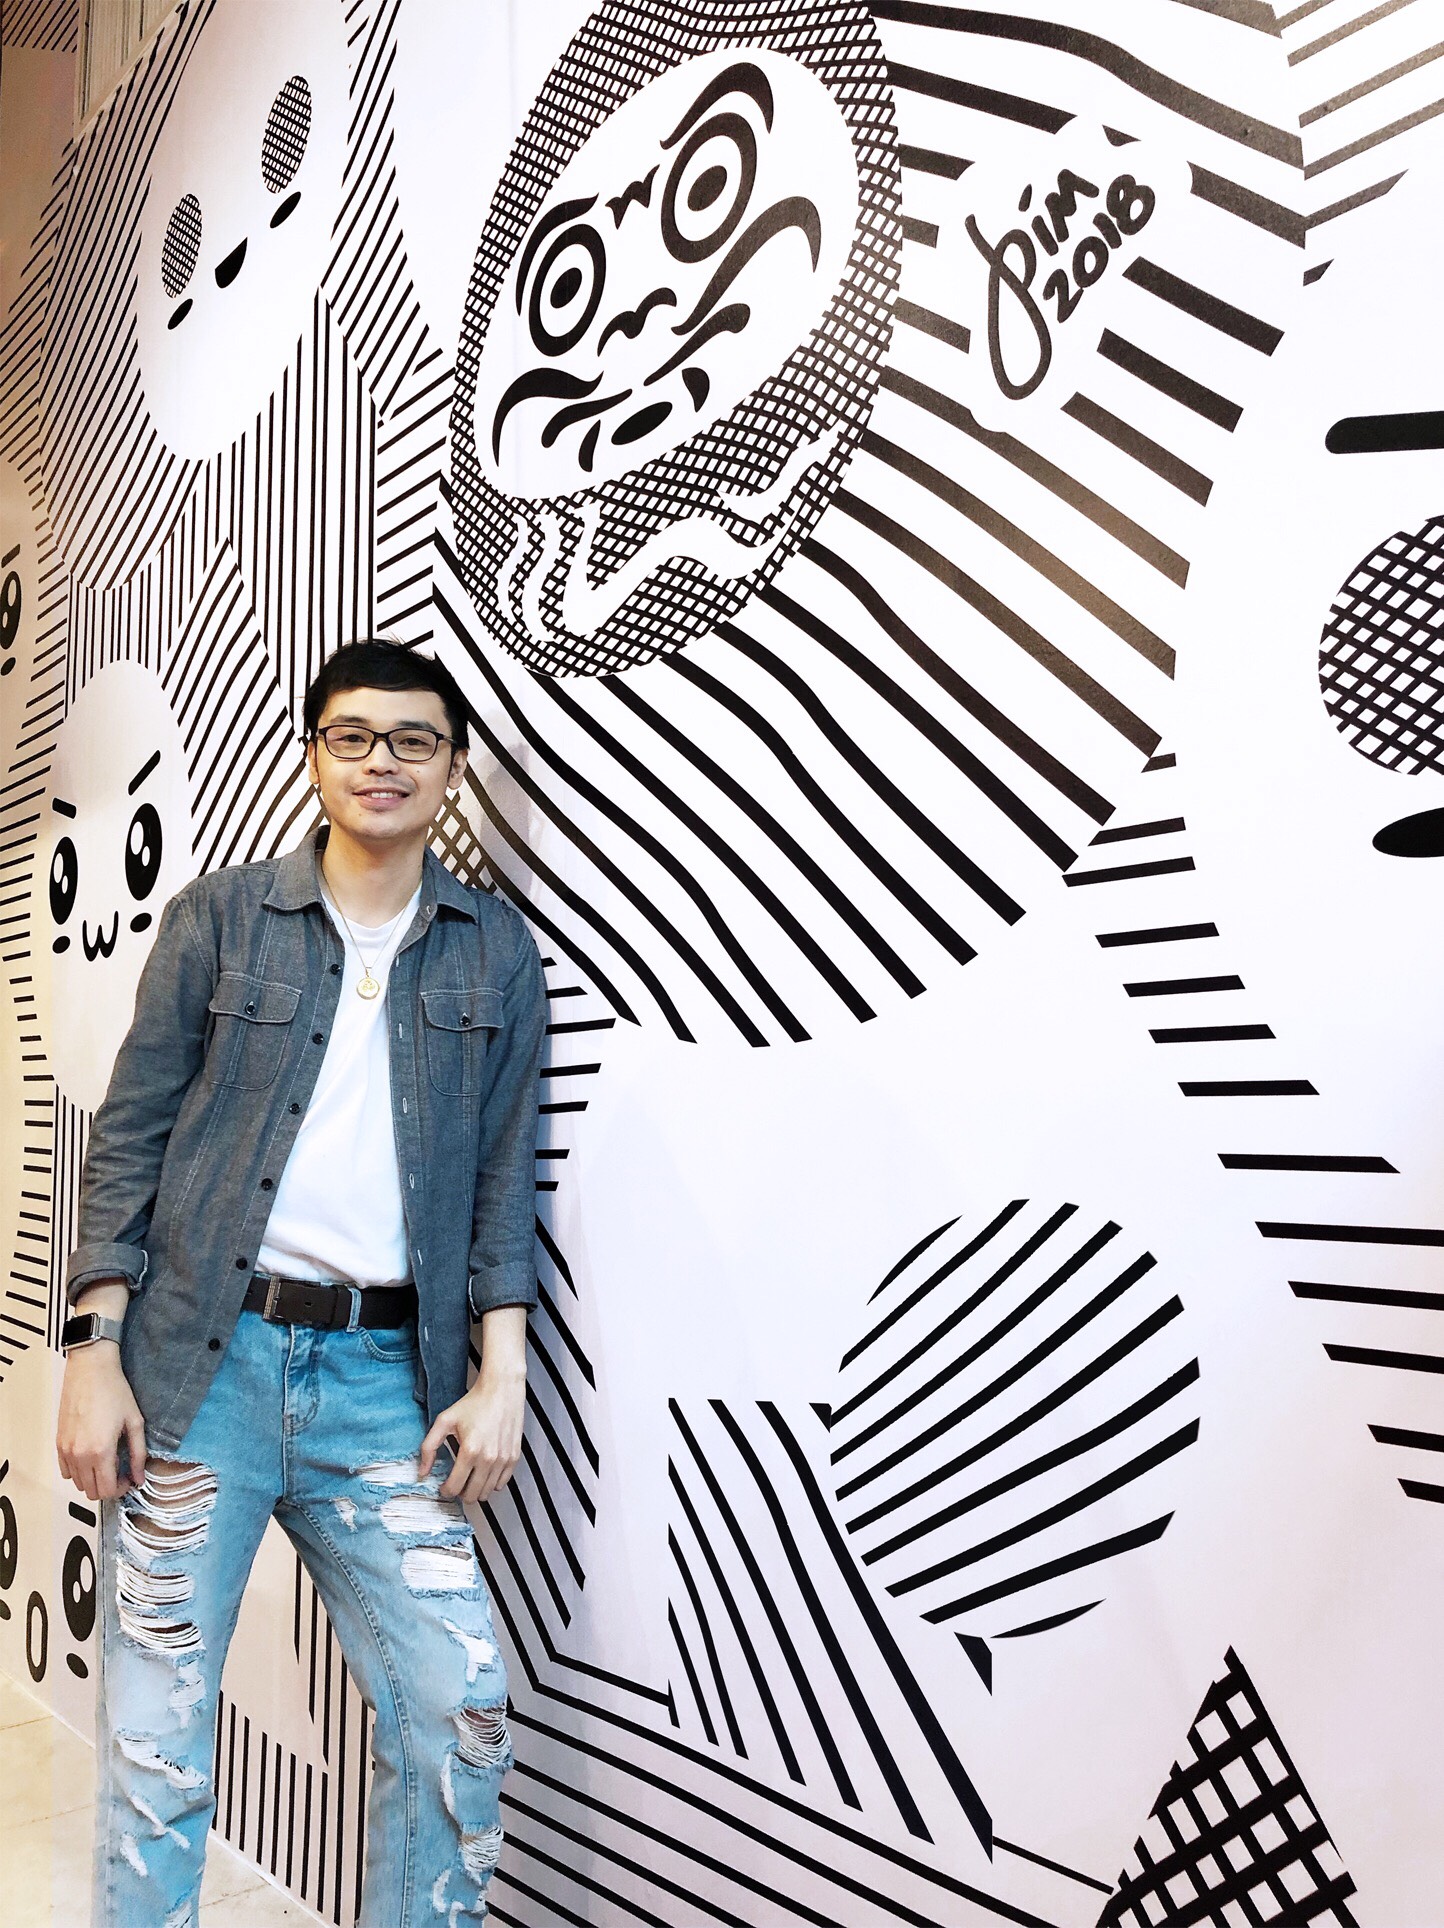 Raintree Group creative head Jeremy Dim is one of the figures behind the reinvention